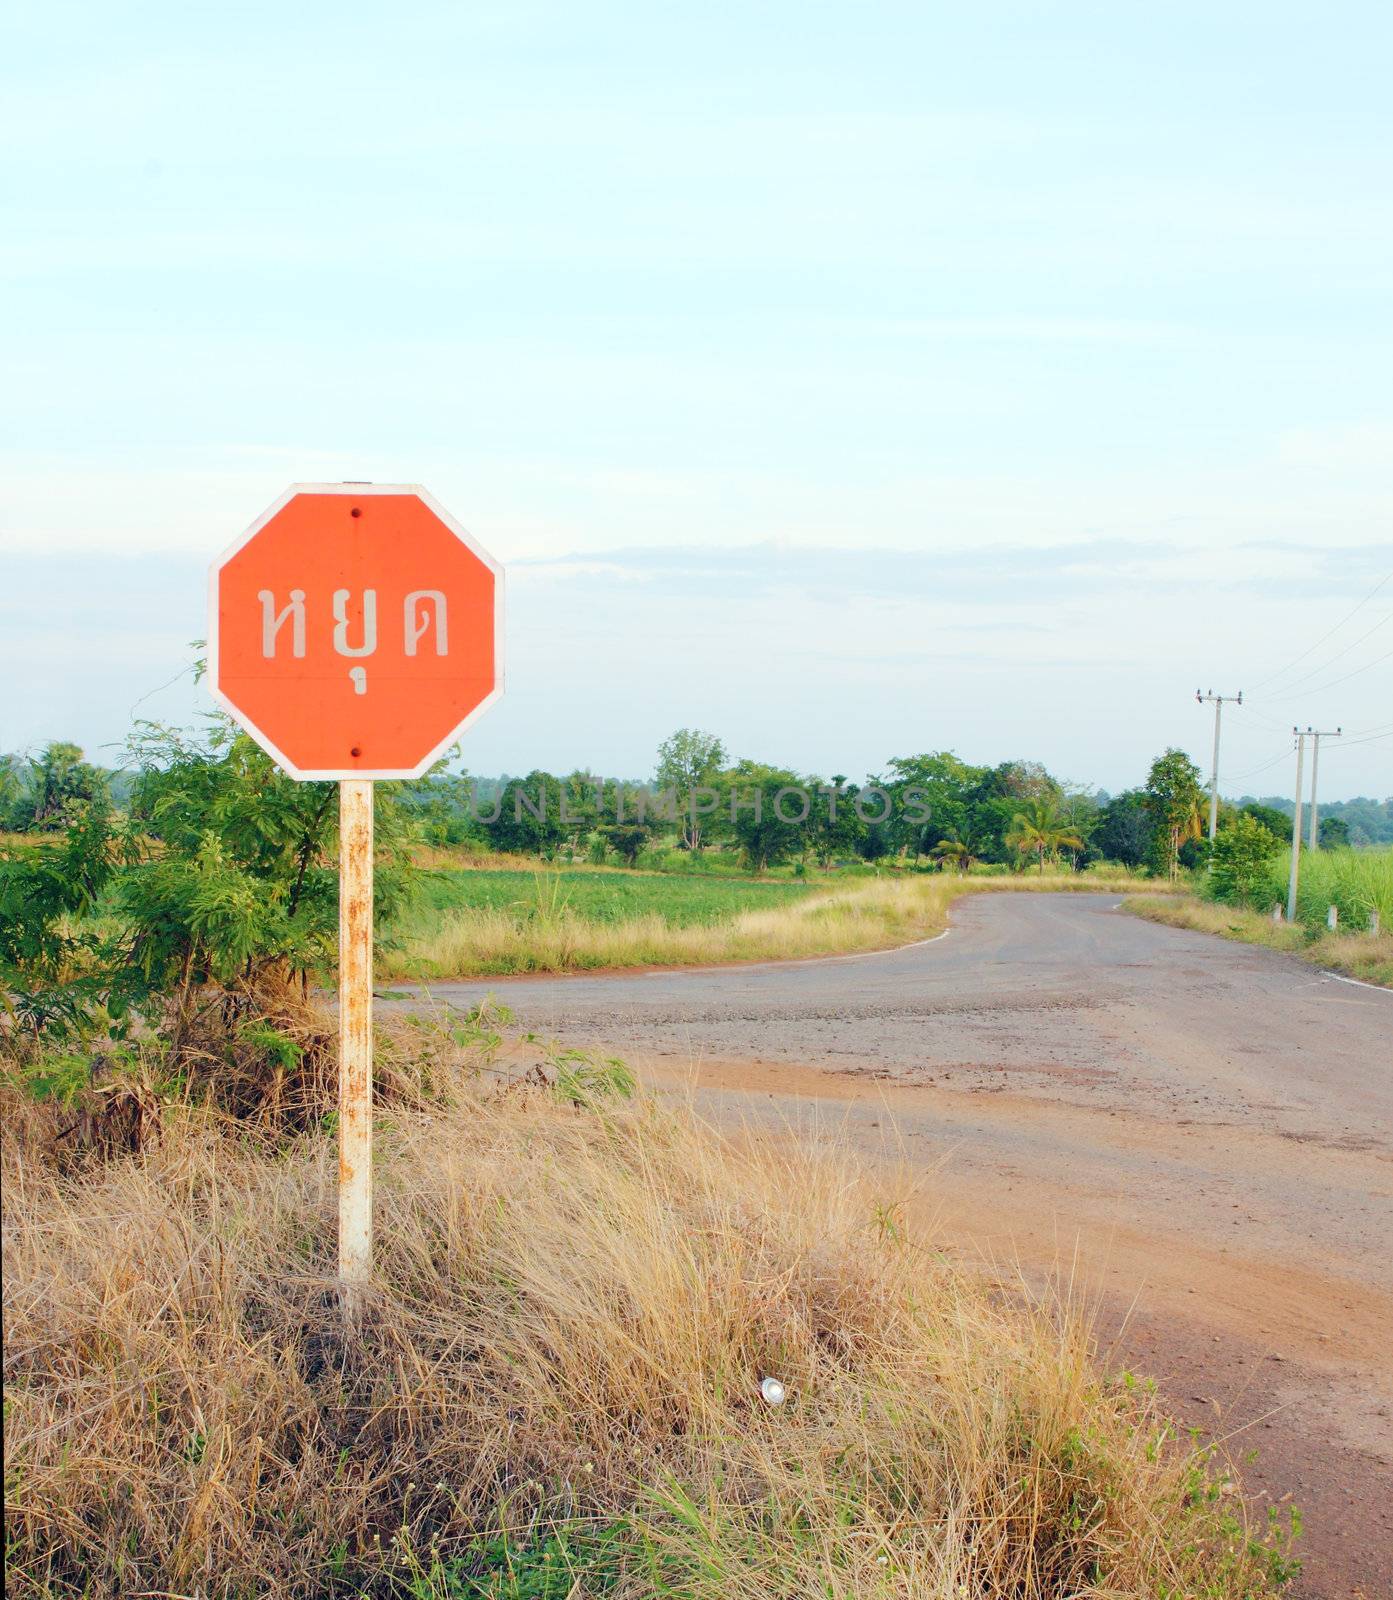 stop sign in a country road (Thai language) by geargodz